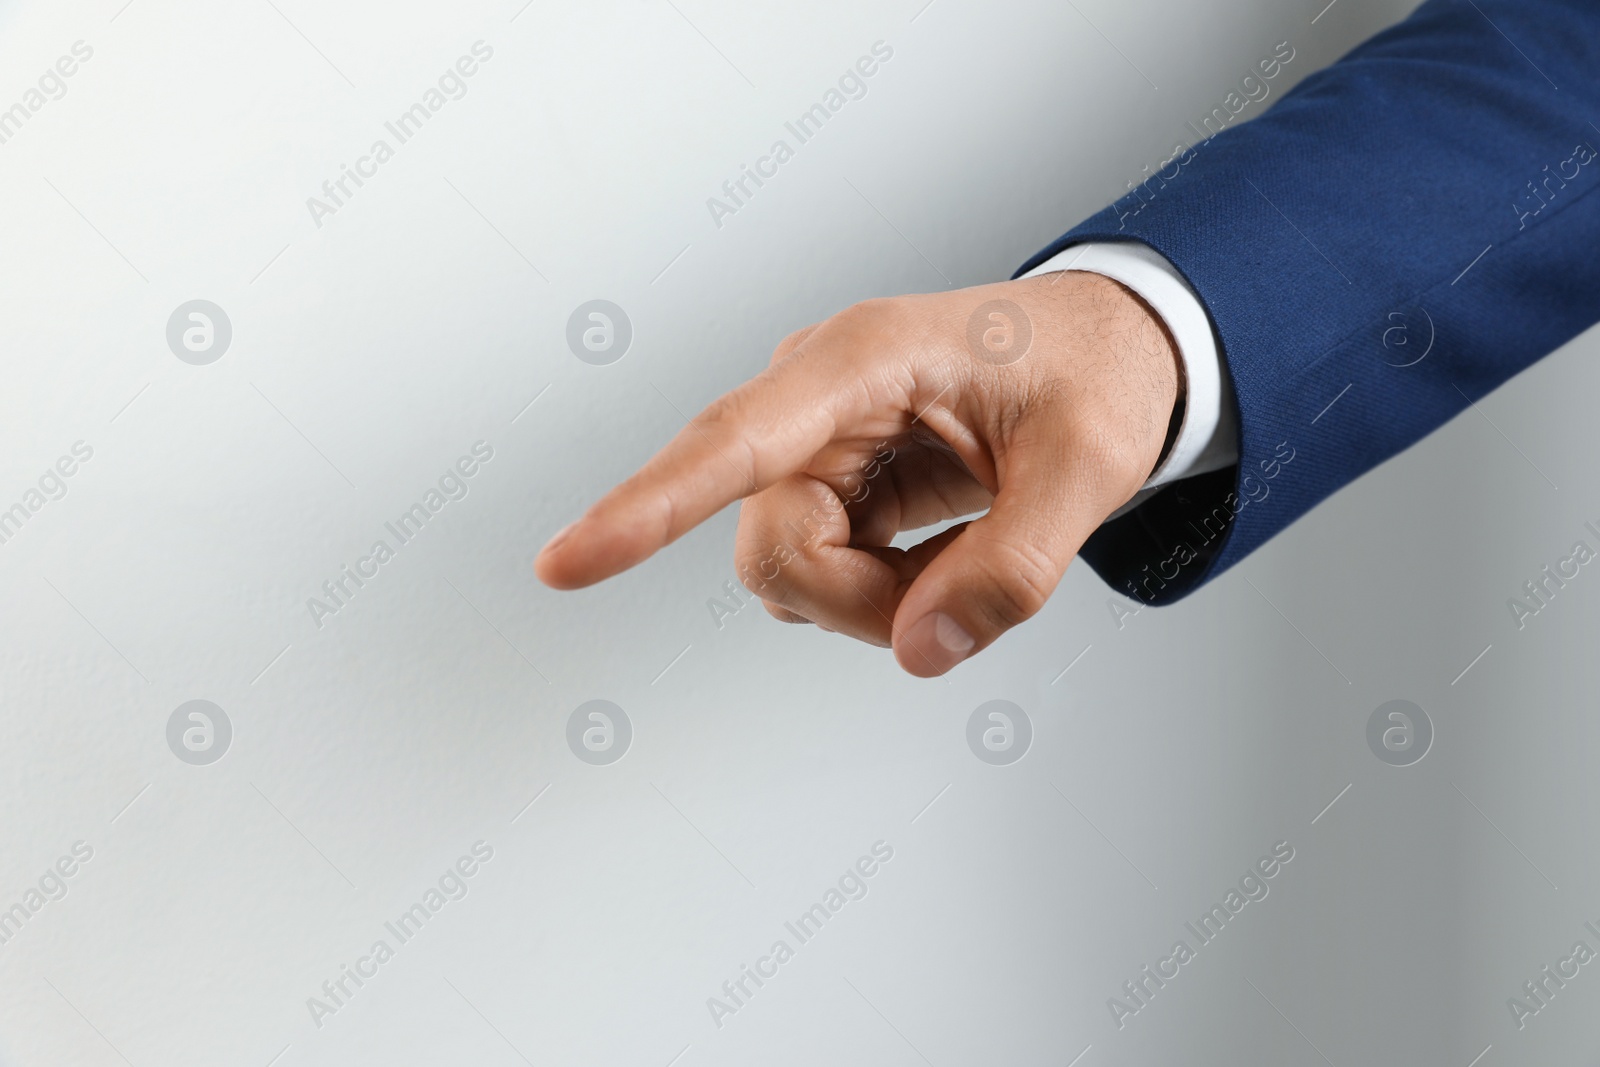 Photo of Man pointing at something on light background, closeup